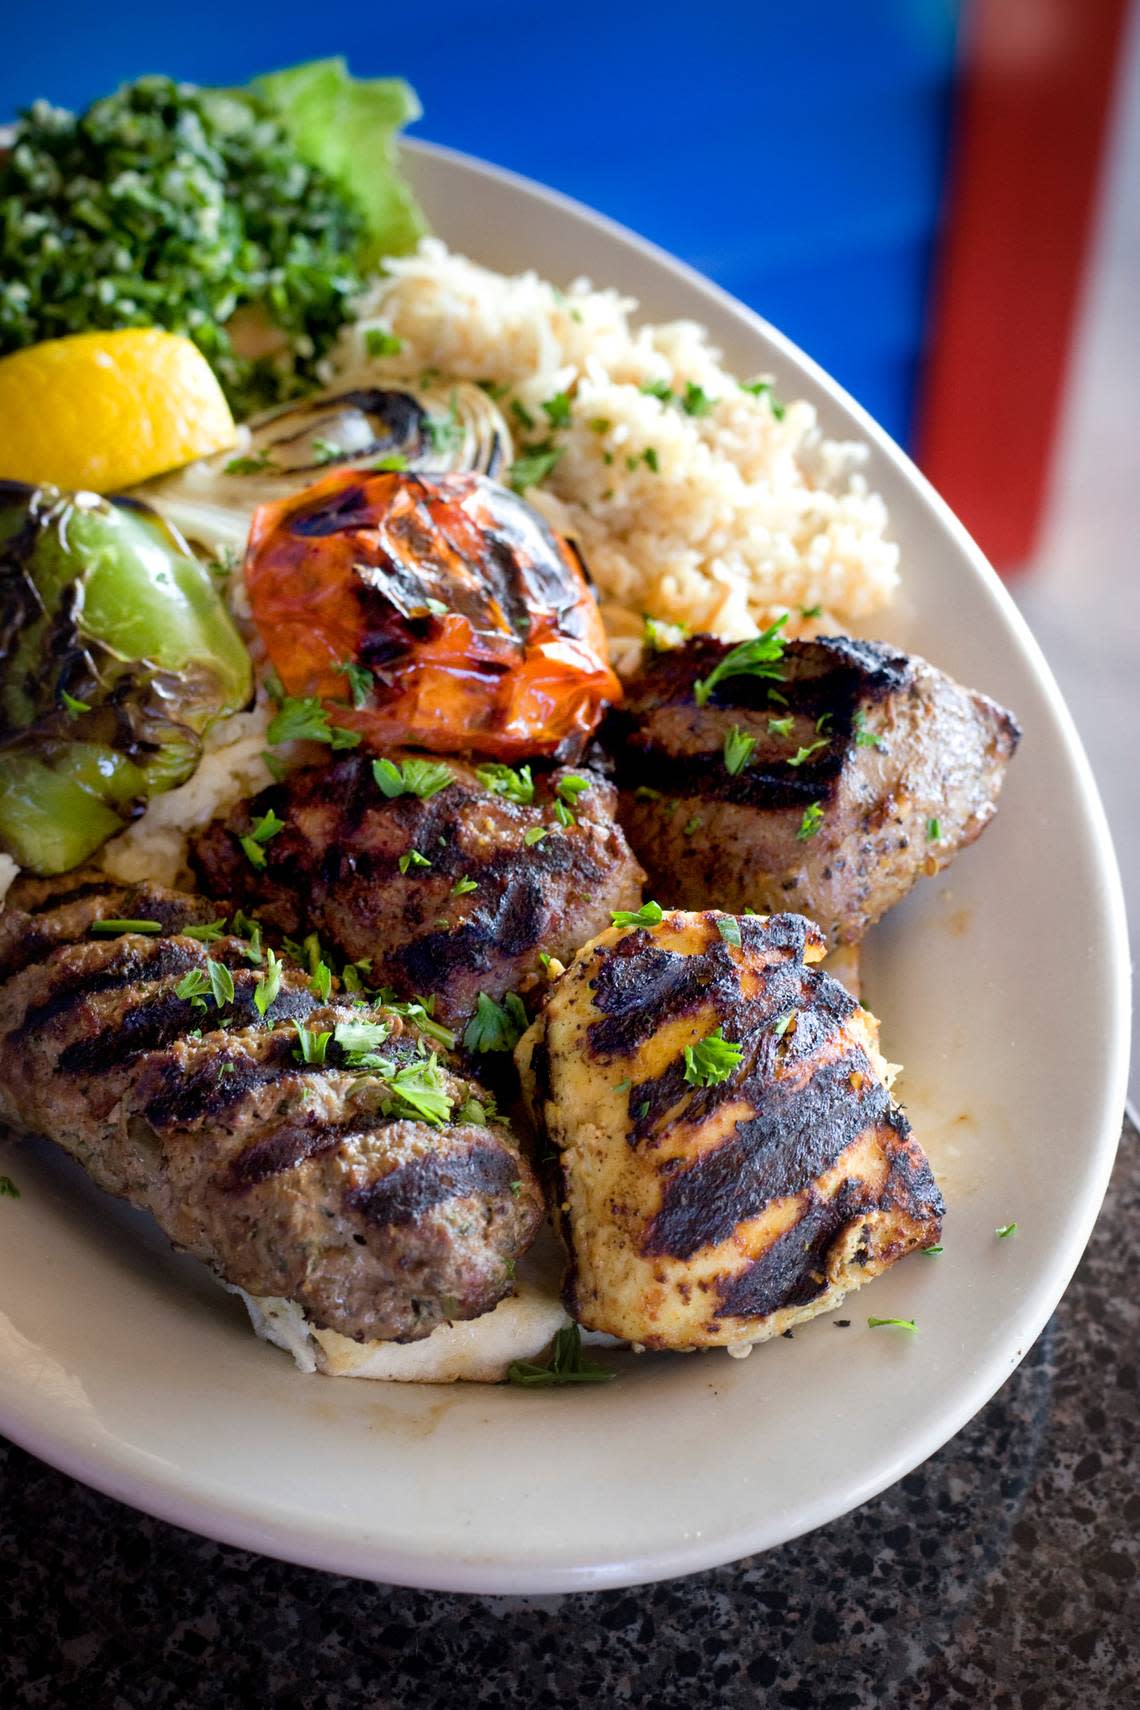 The Prince Lebanese special, includes an assortment of lamb, beef. shish tawook, kebabs and tabbouleh at Prince Lebanese Grill. Joyce Marshall/Star-Telegram archives